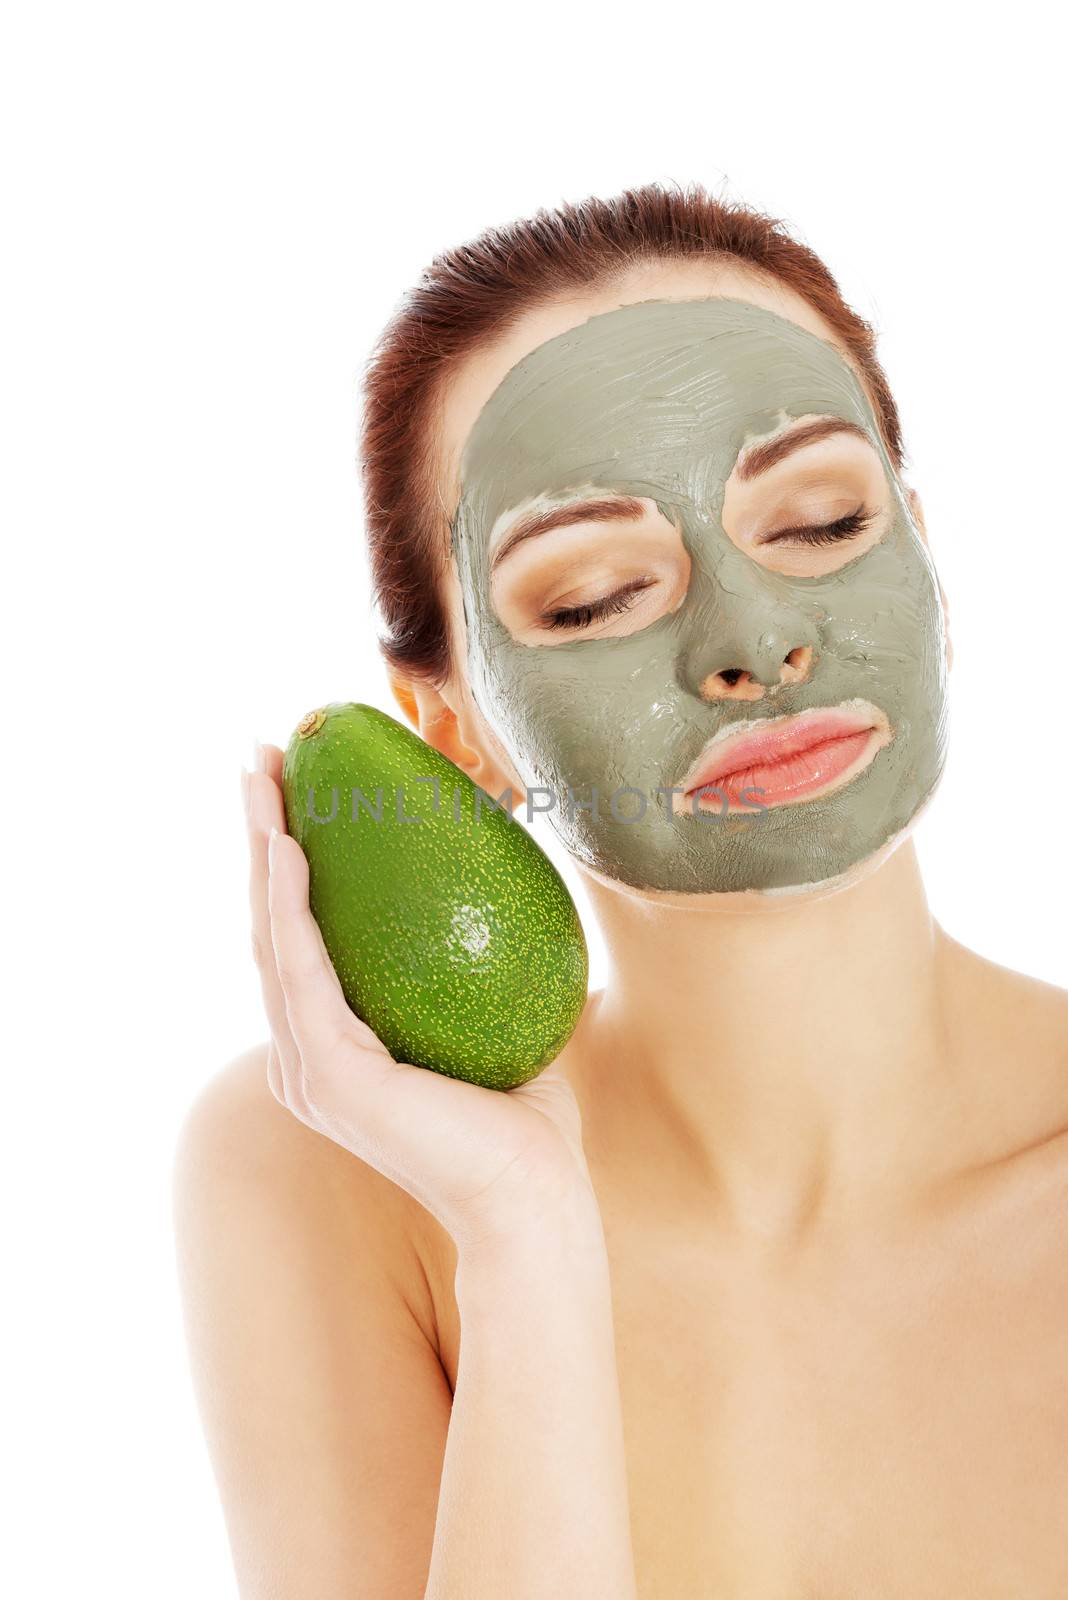 Beautiful woman with facial mask holding avocado and closed eyes. Isolated on white.